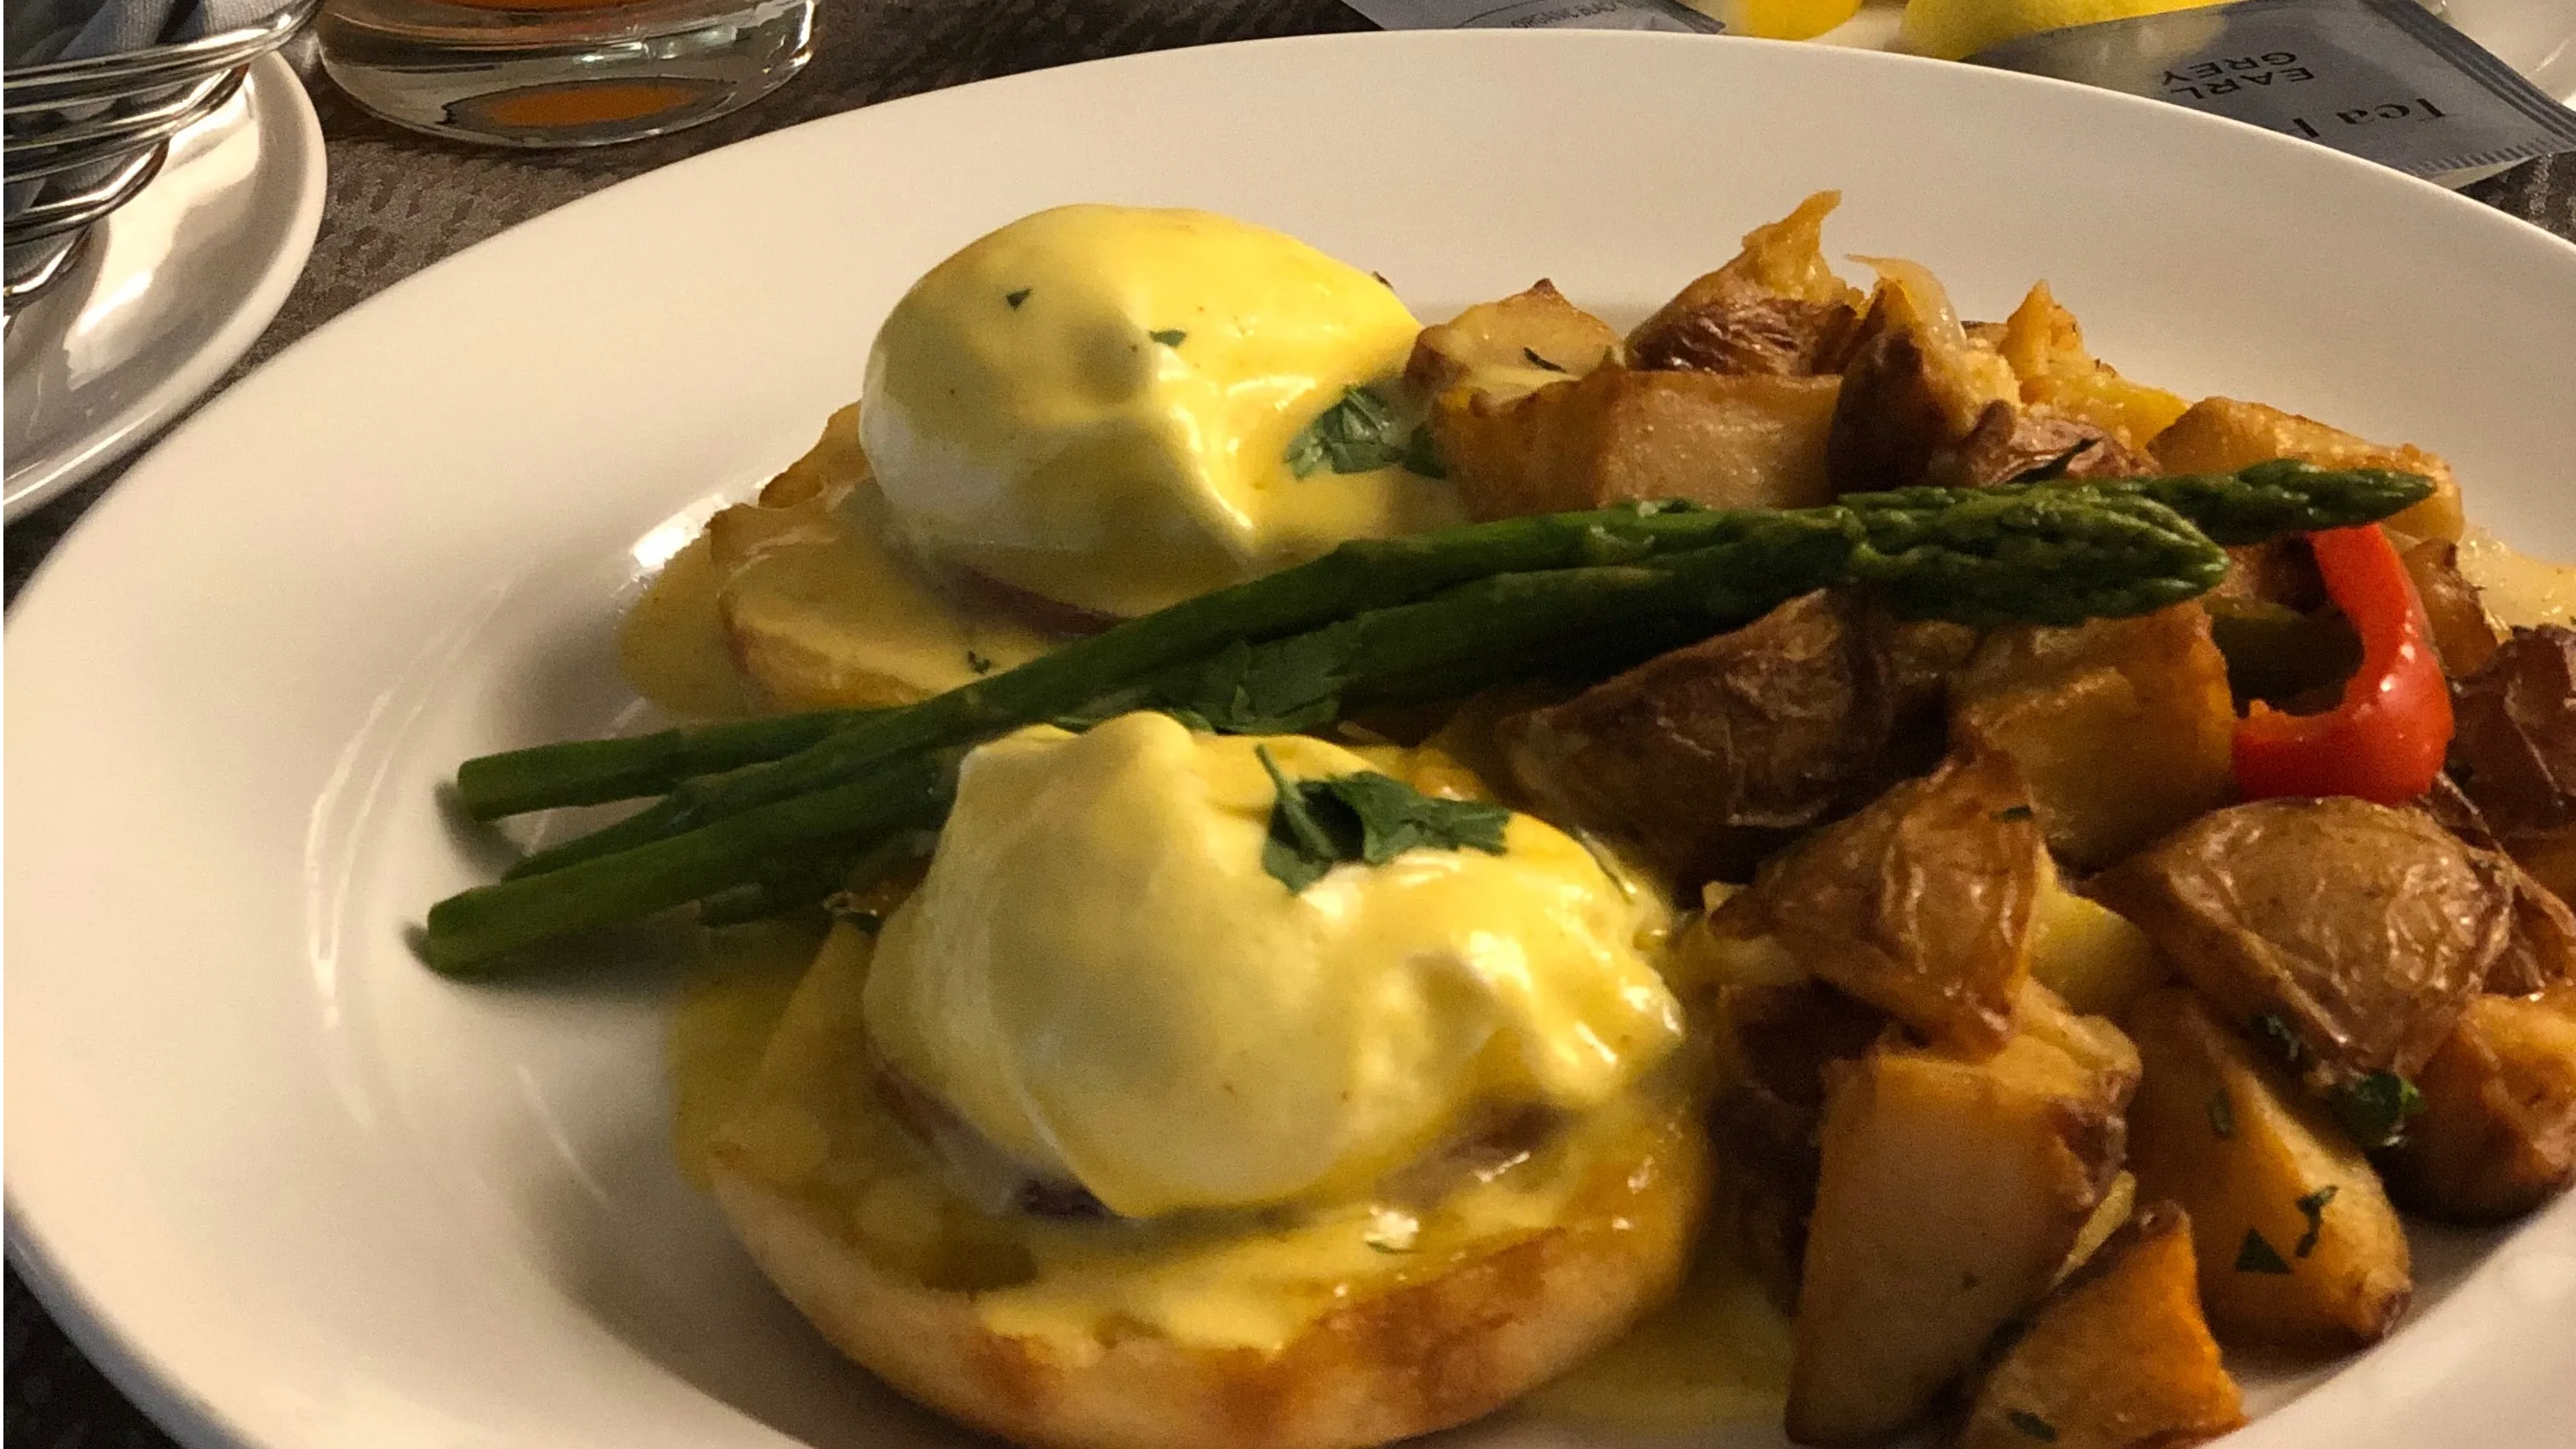 The ‘Eggs Halifax’ trend that caught Internet by storm